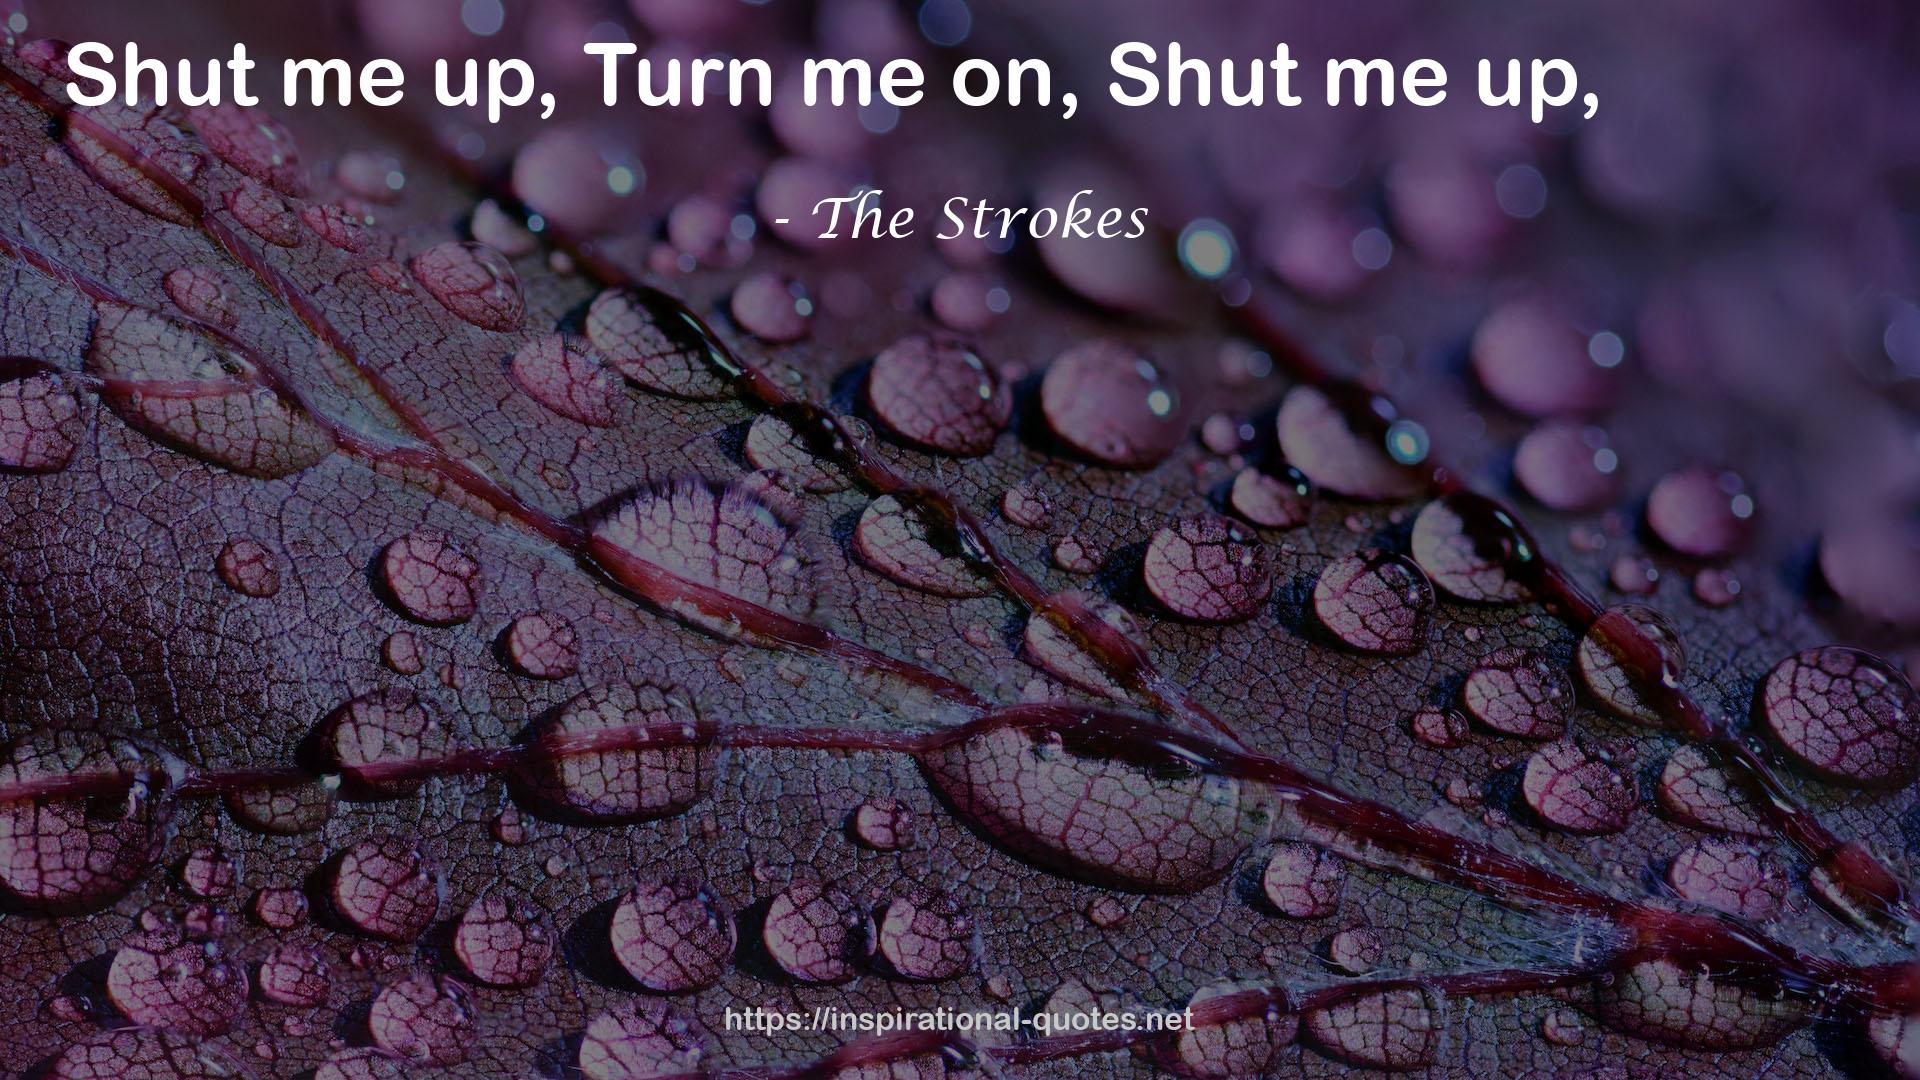 The Strokes QUOTES